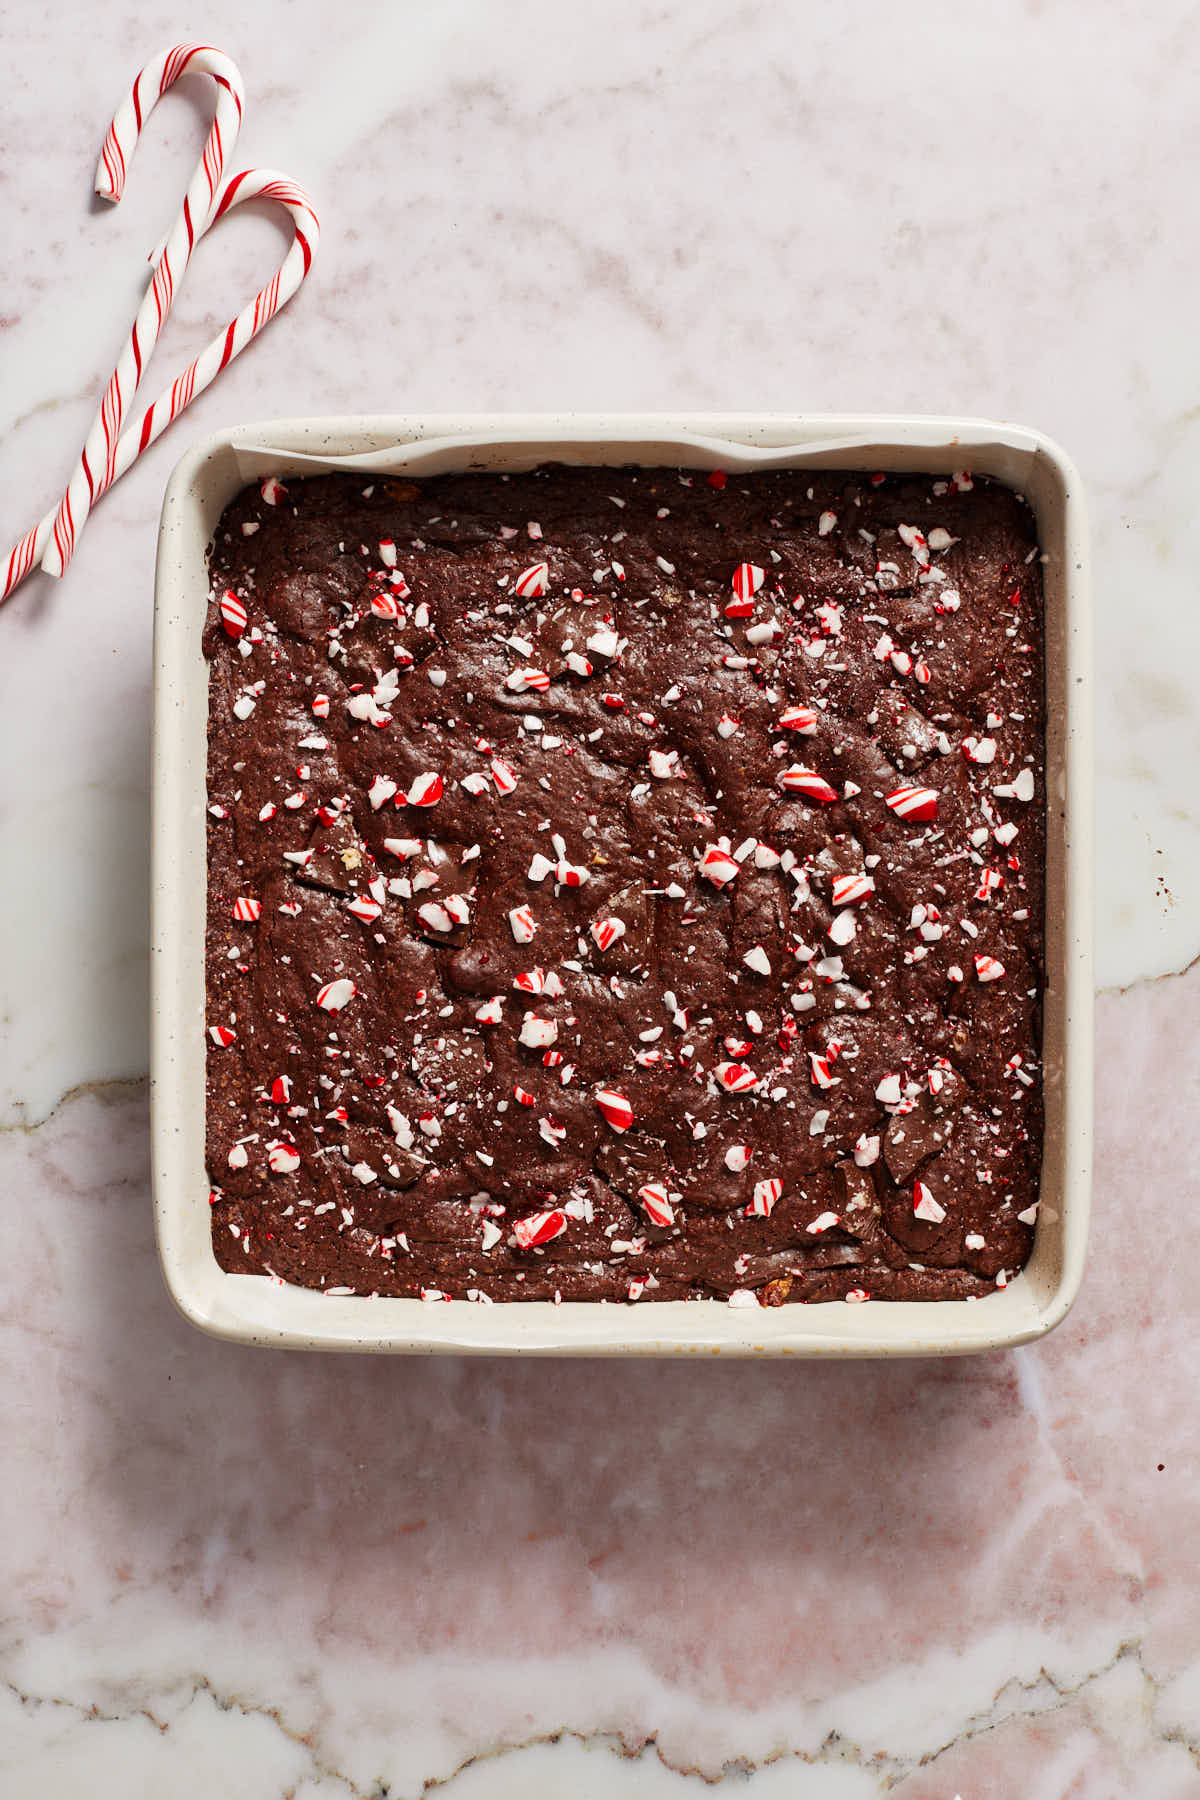 Fully baked brownies in the pan and topped with crushed candy canes.